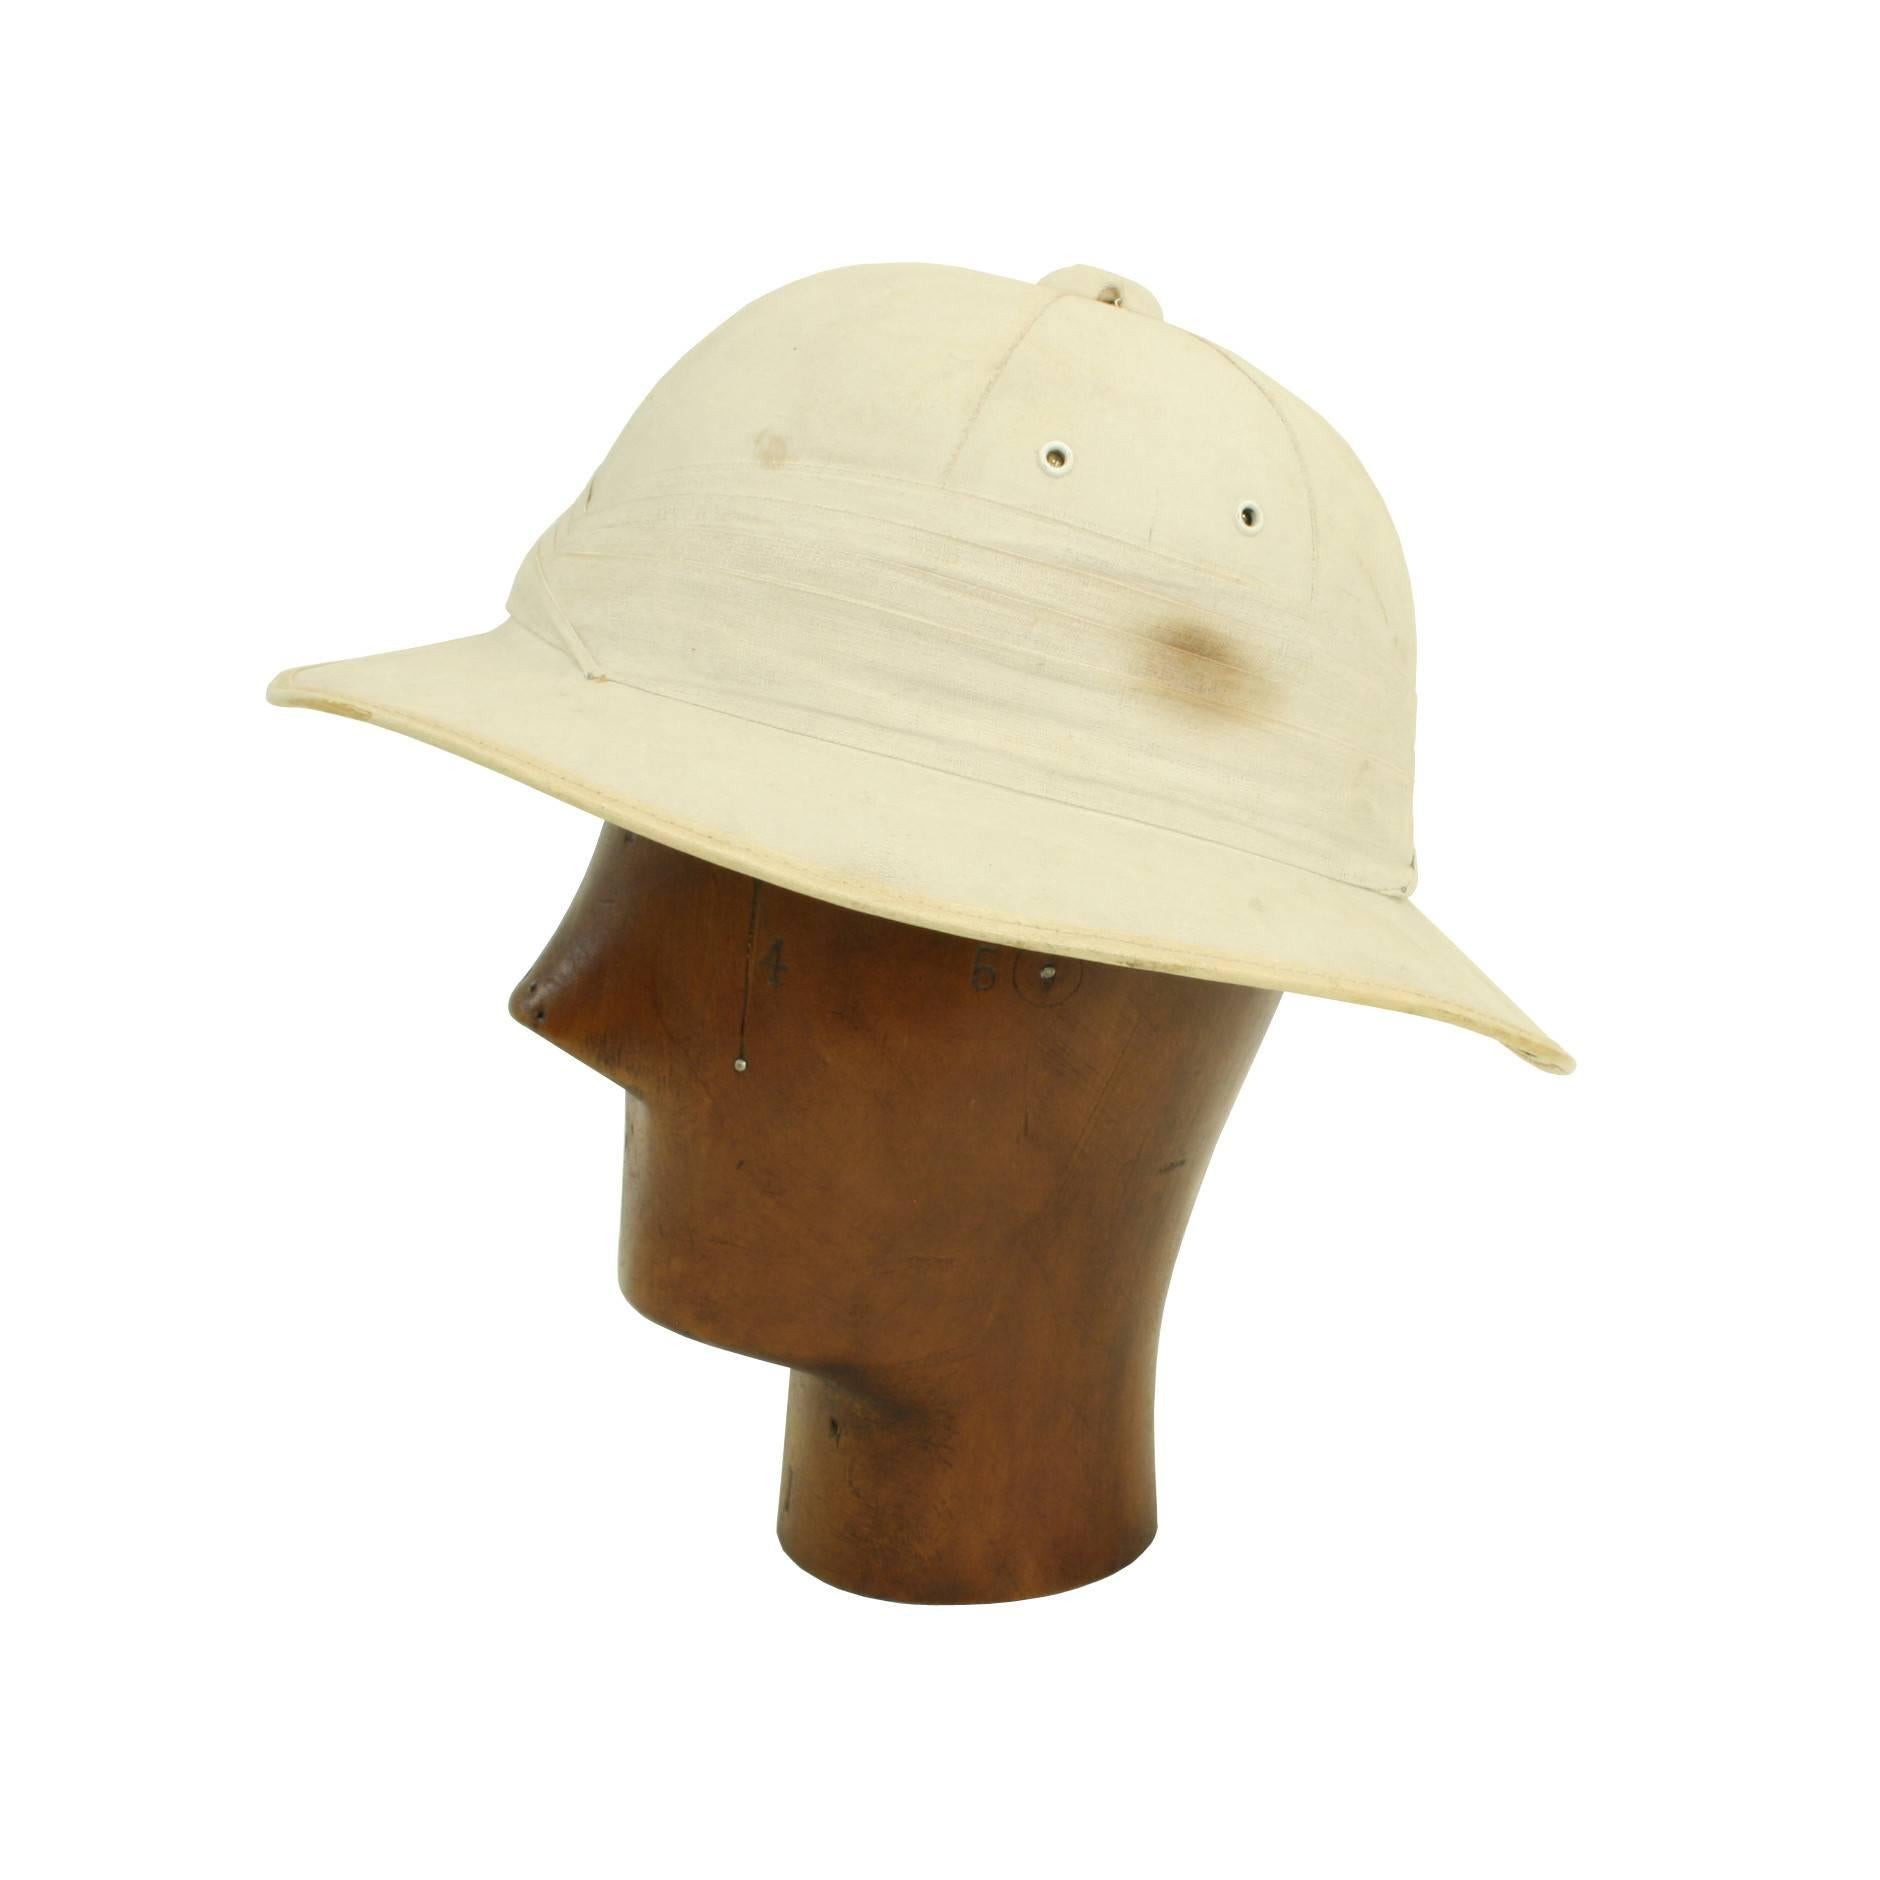 Pith Helmet - 2 For Sale on 1stDibs | antique pith helmet, vintage pith  helmet for sale, original british pith helmet for sale